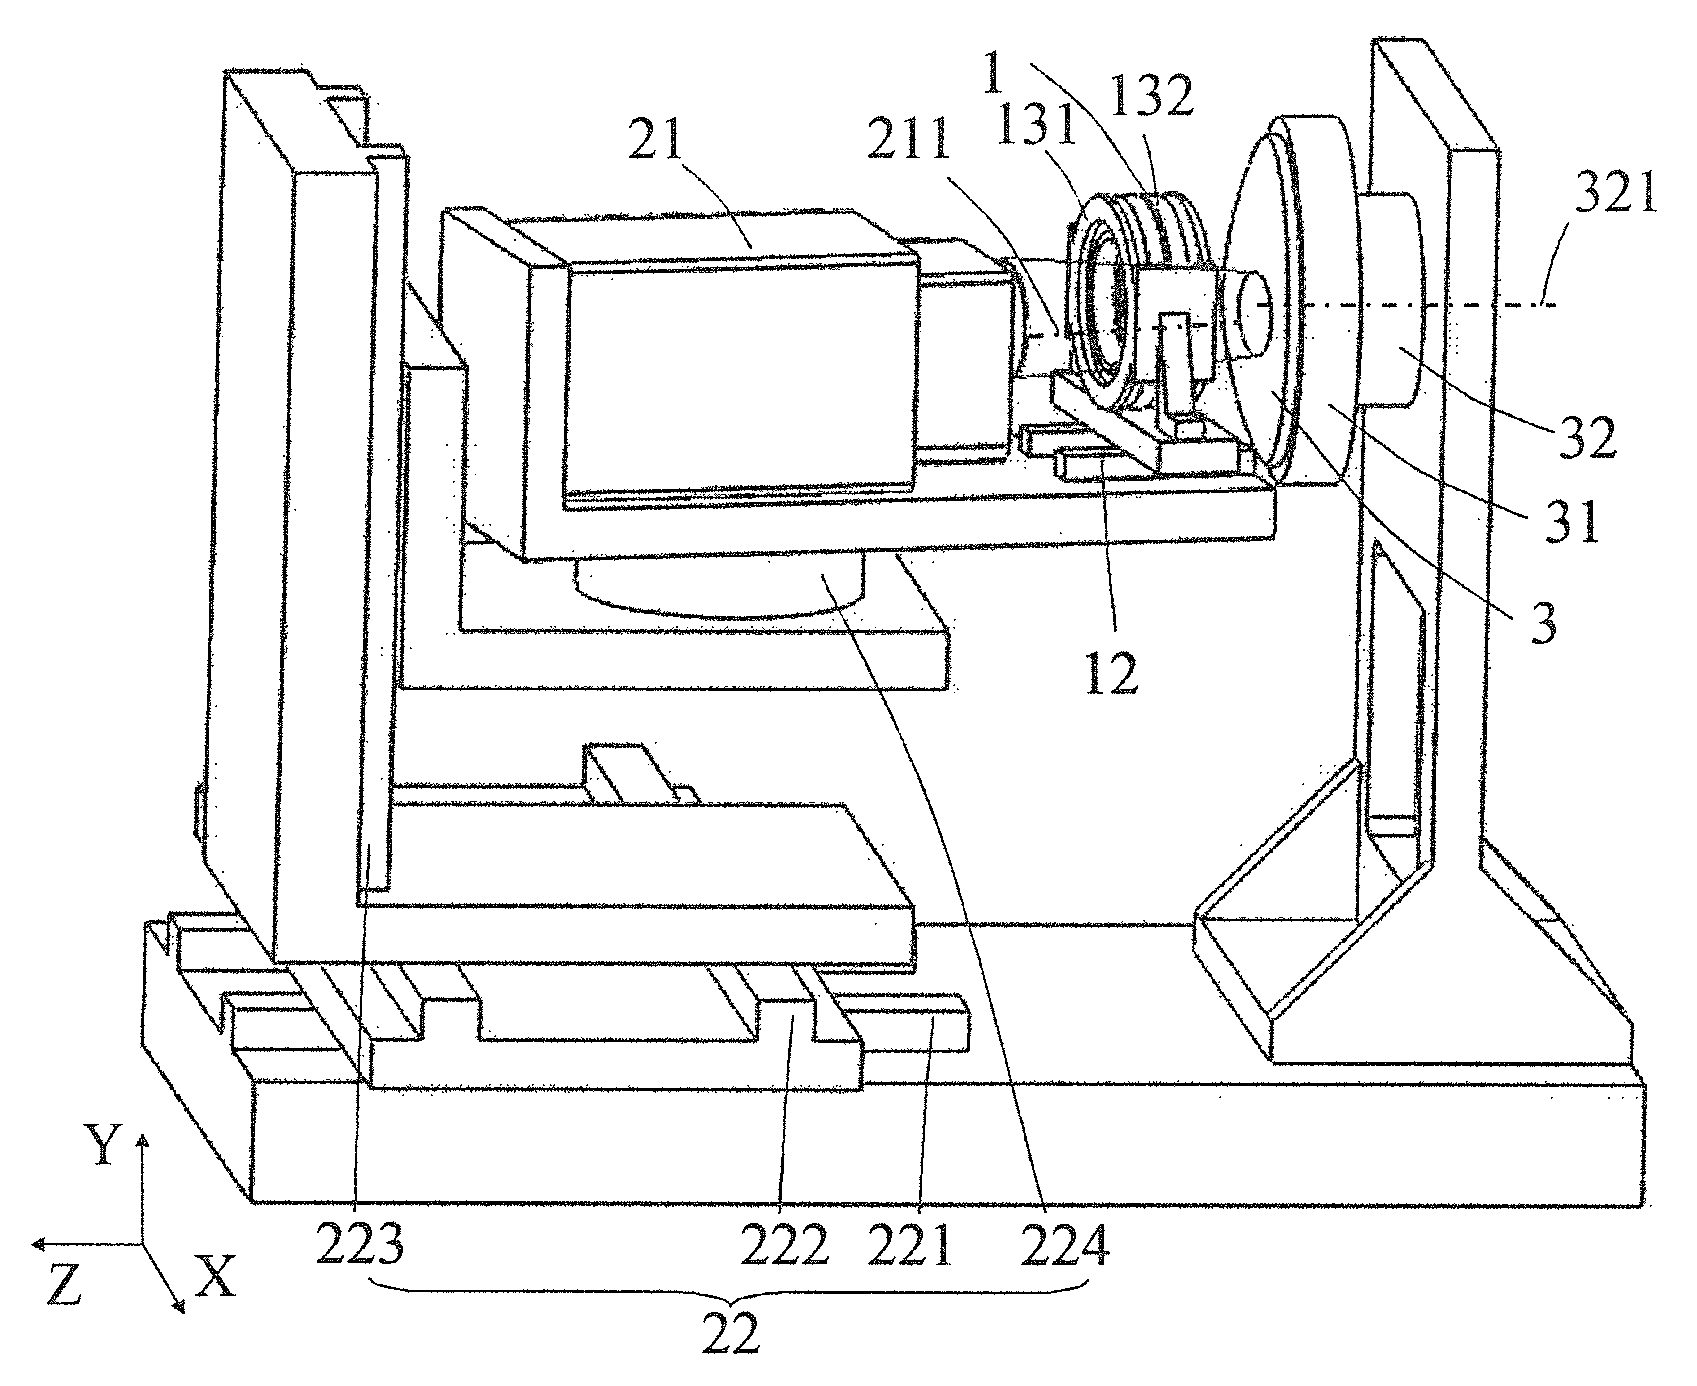 Near-null compensator and figure metrology apparatus for measuring aspheric surfaces by subaperture stitching and measuring method thereof